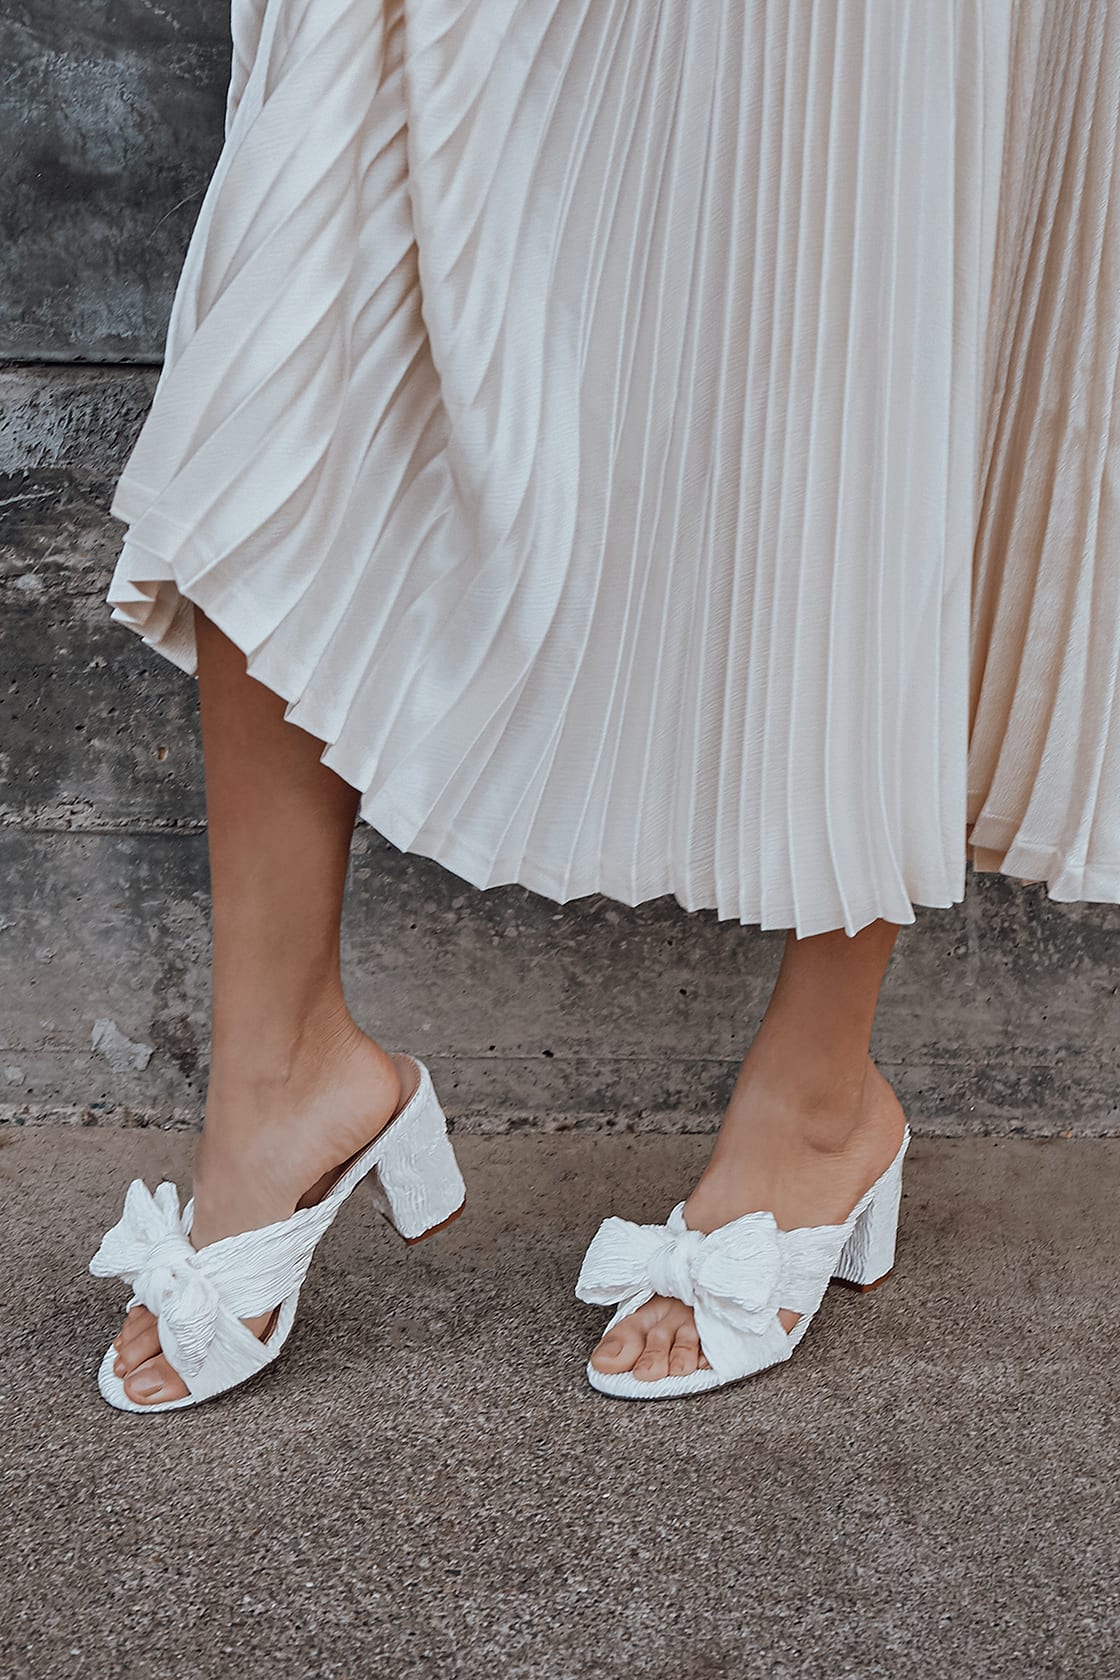 lulus.com | Ivory Knotted High Heel Sandals